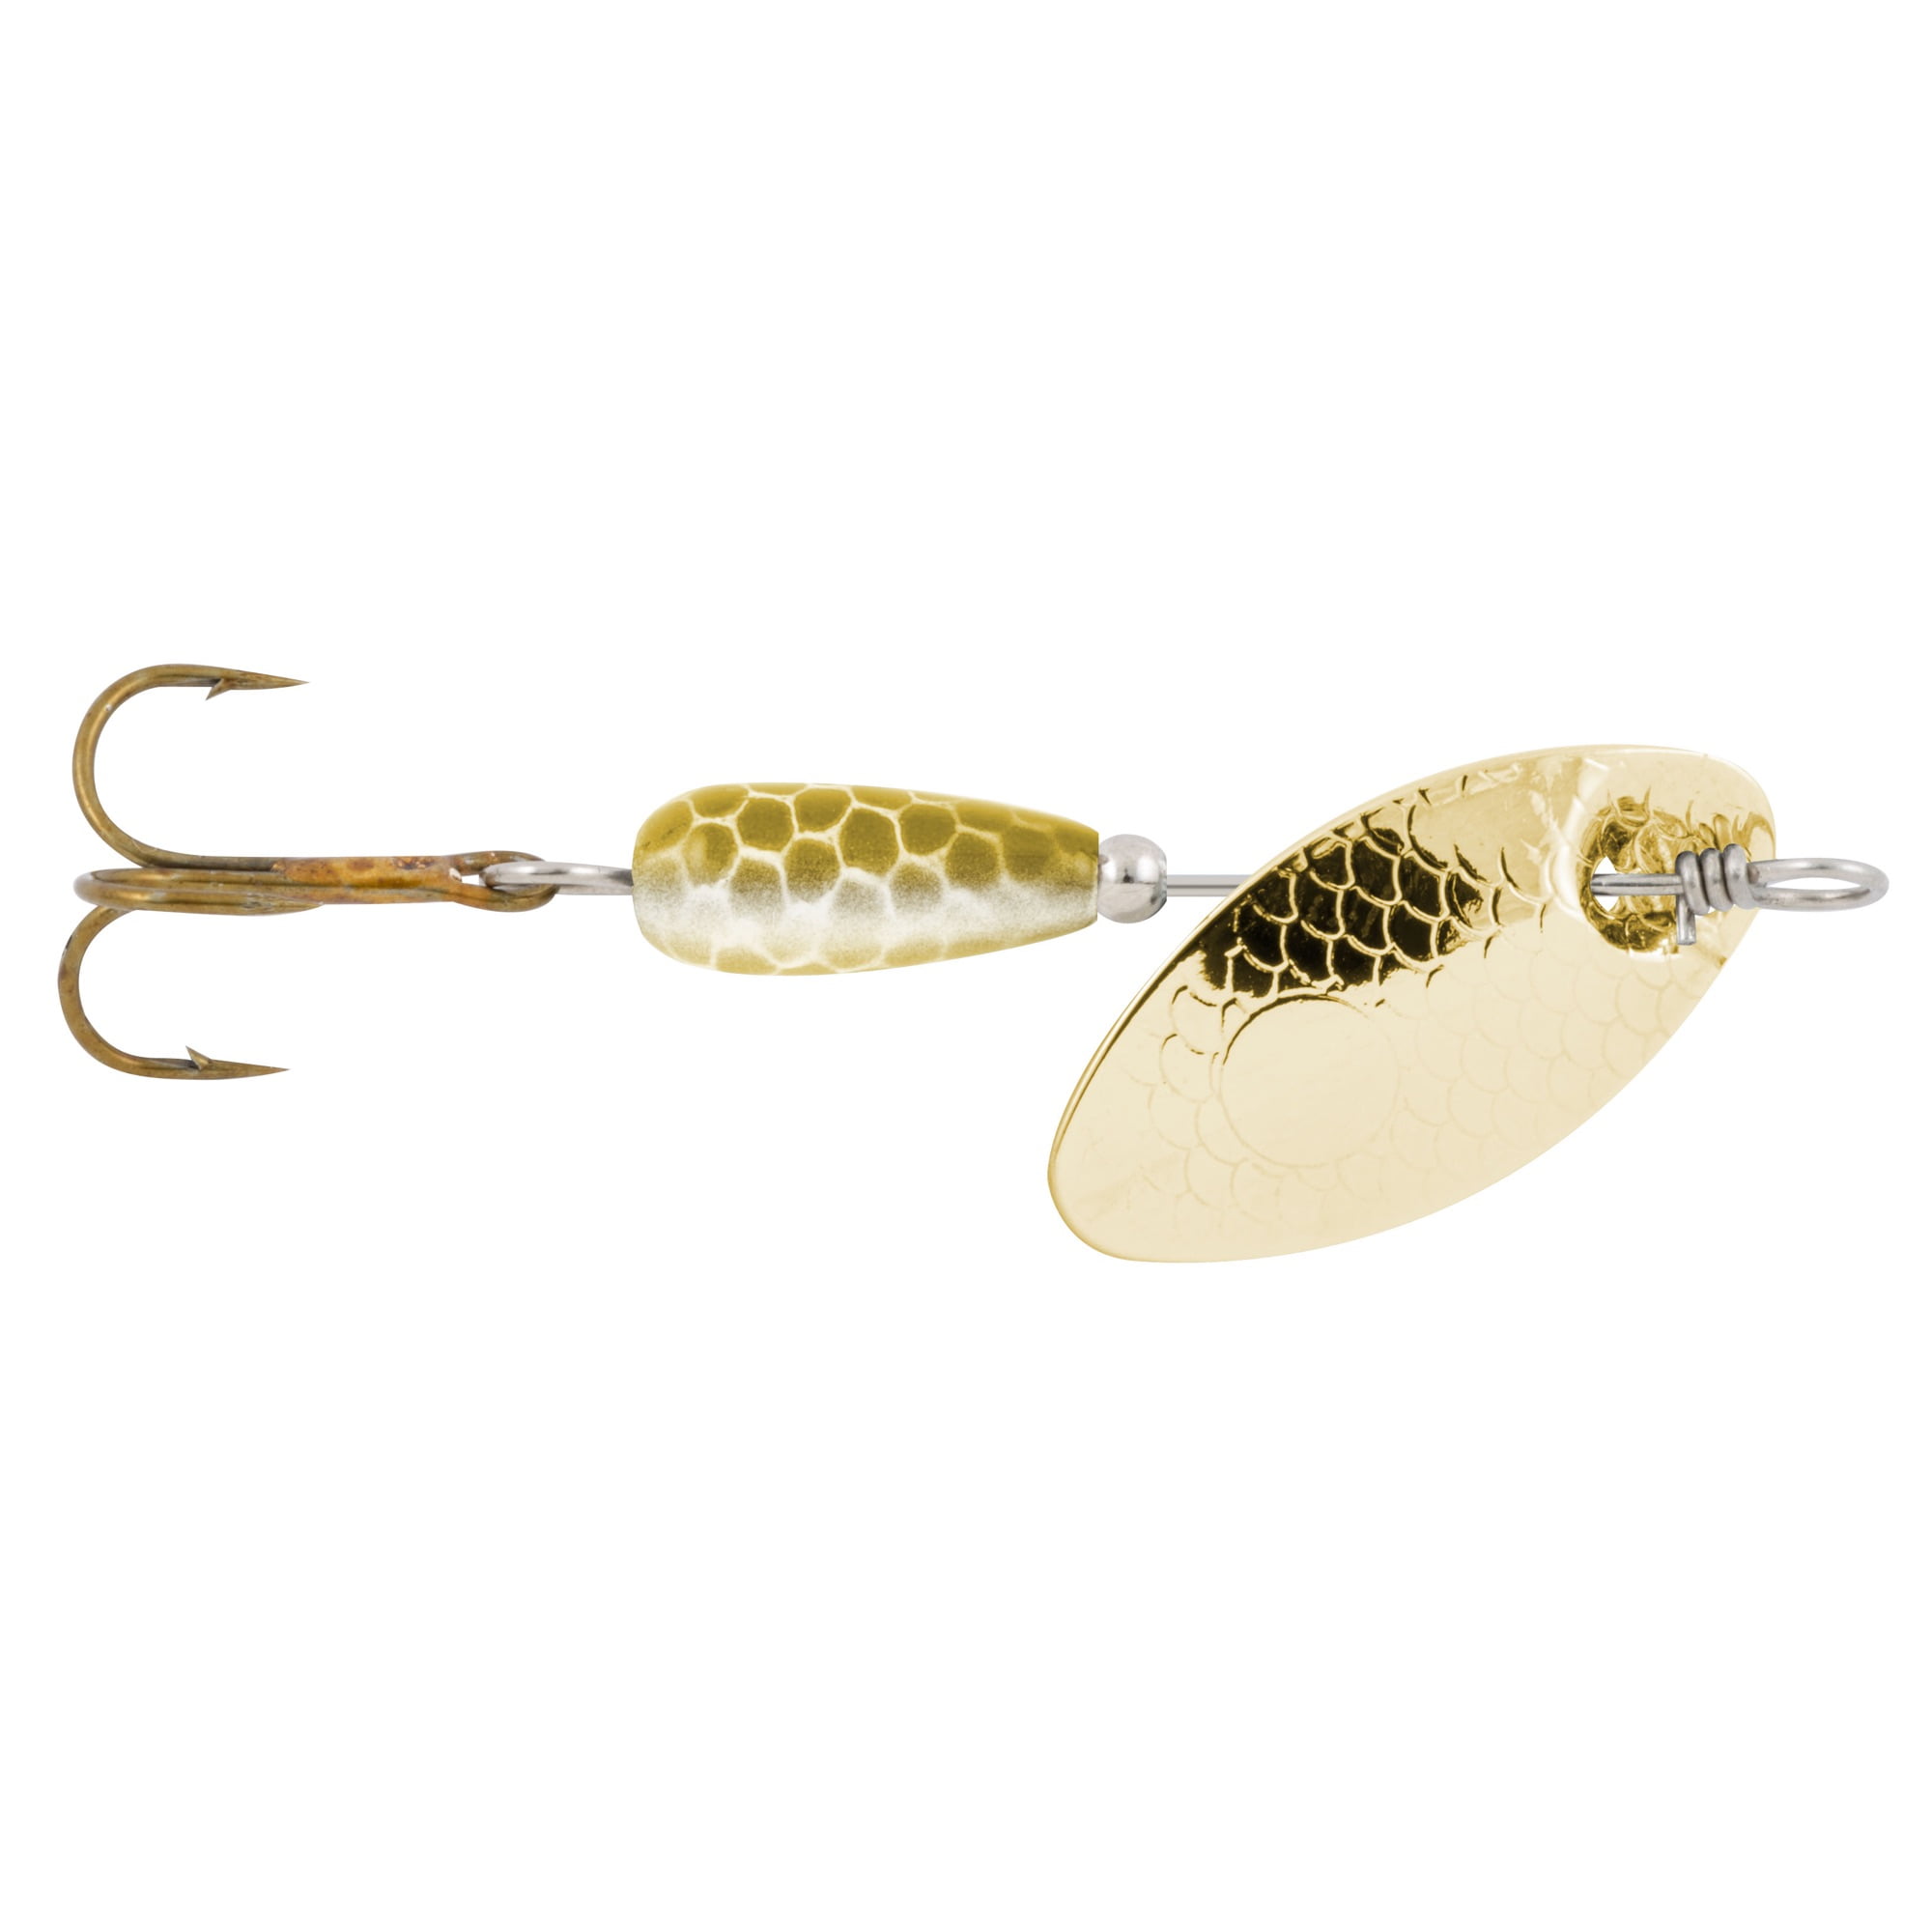 South Bend Techny Spinnerbaits Freshwater Trout Fishing Lures, Gold, 1/32  oz.